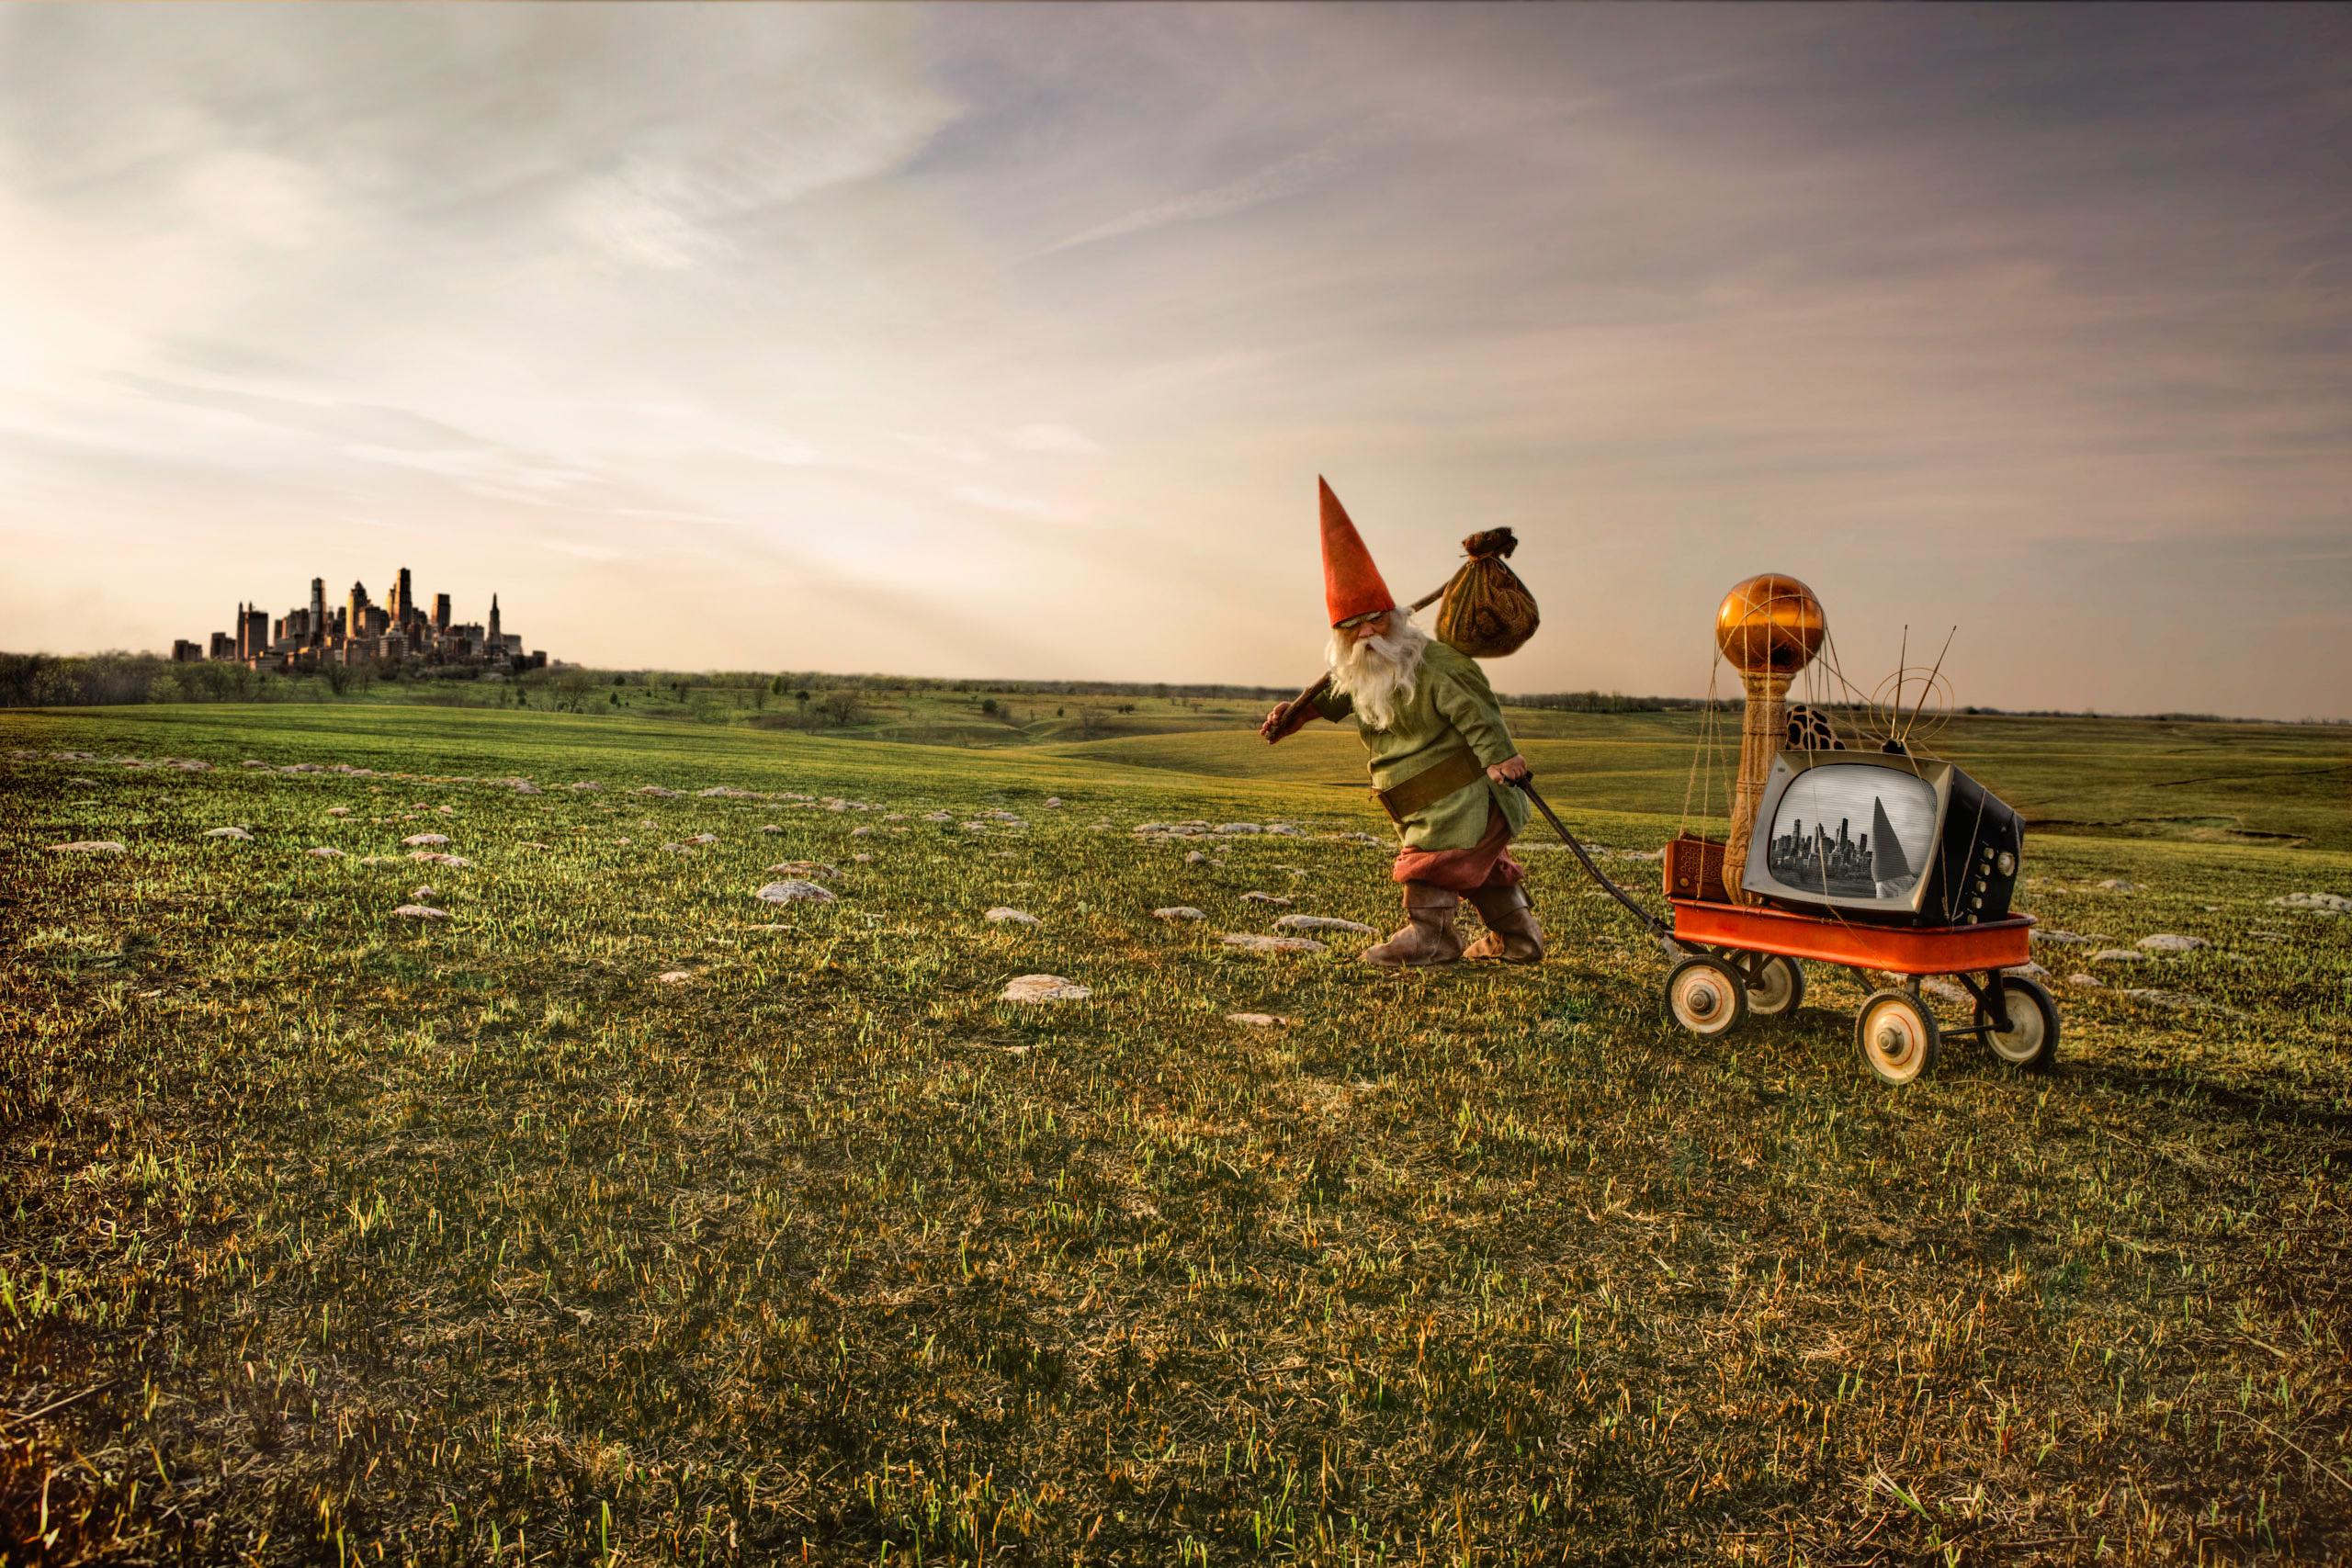 Gnome Journey - Photograph by Nick Vedros